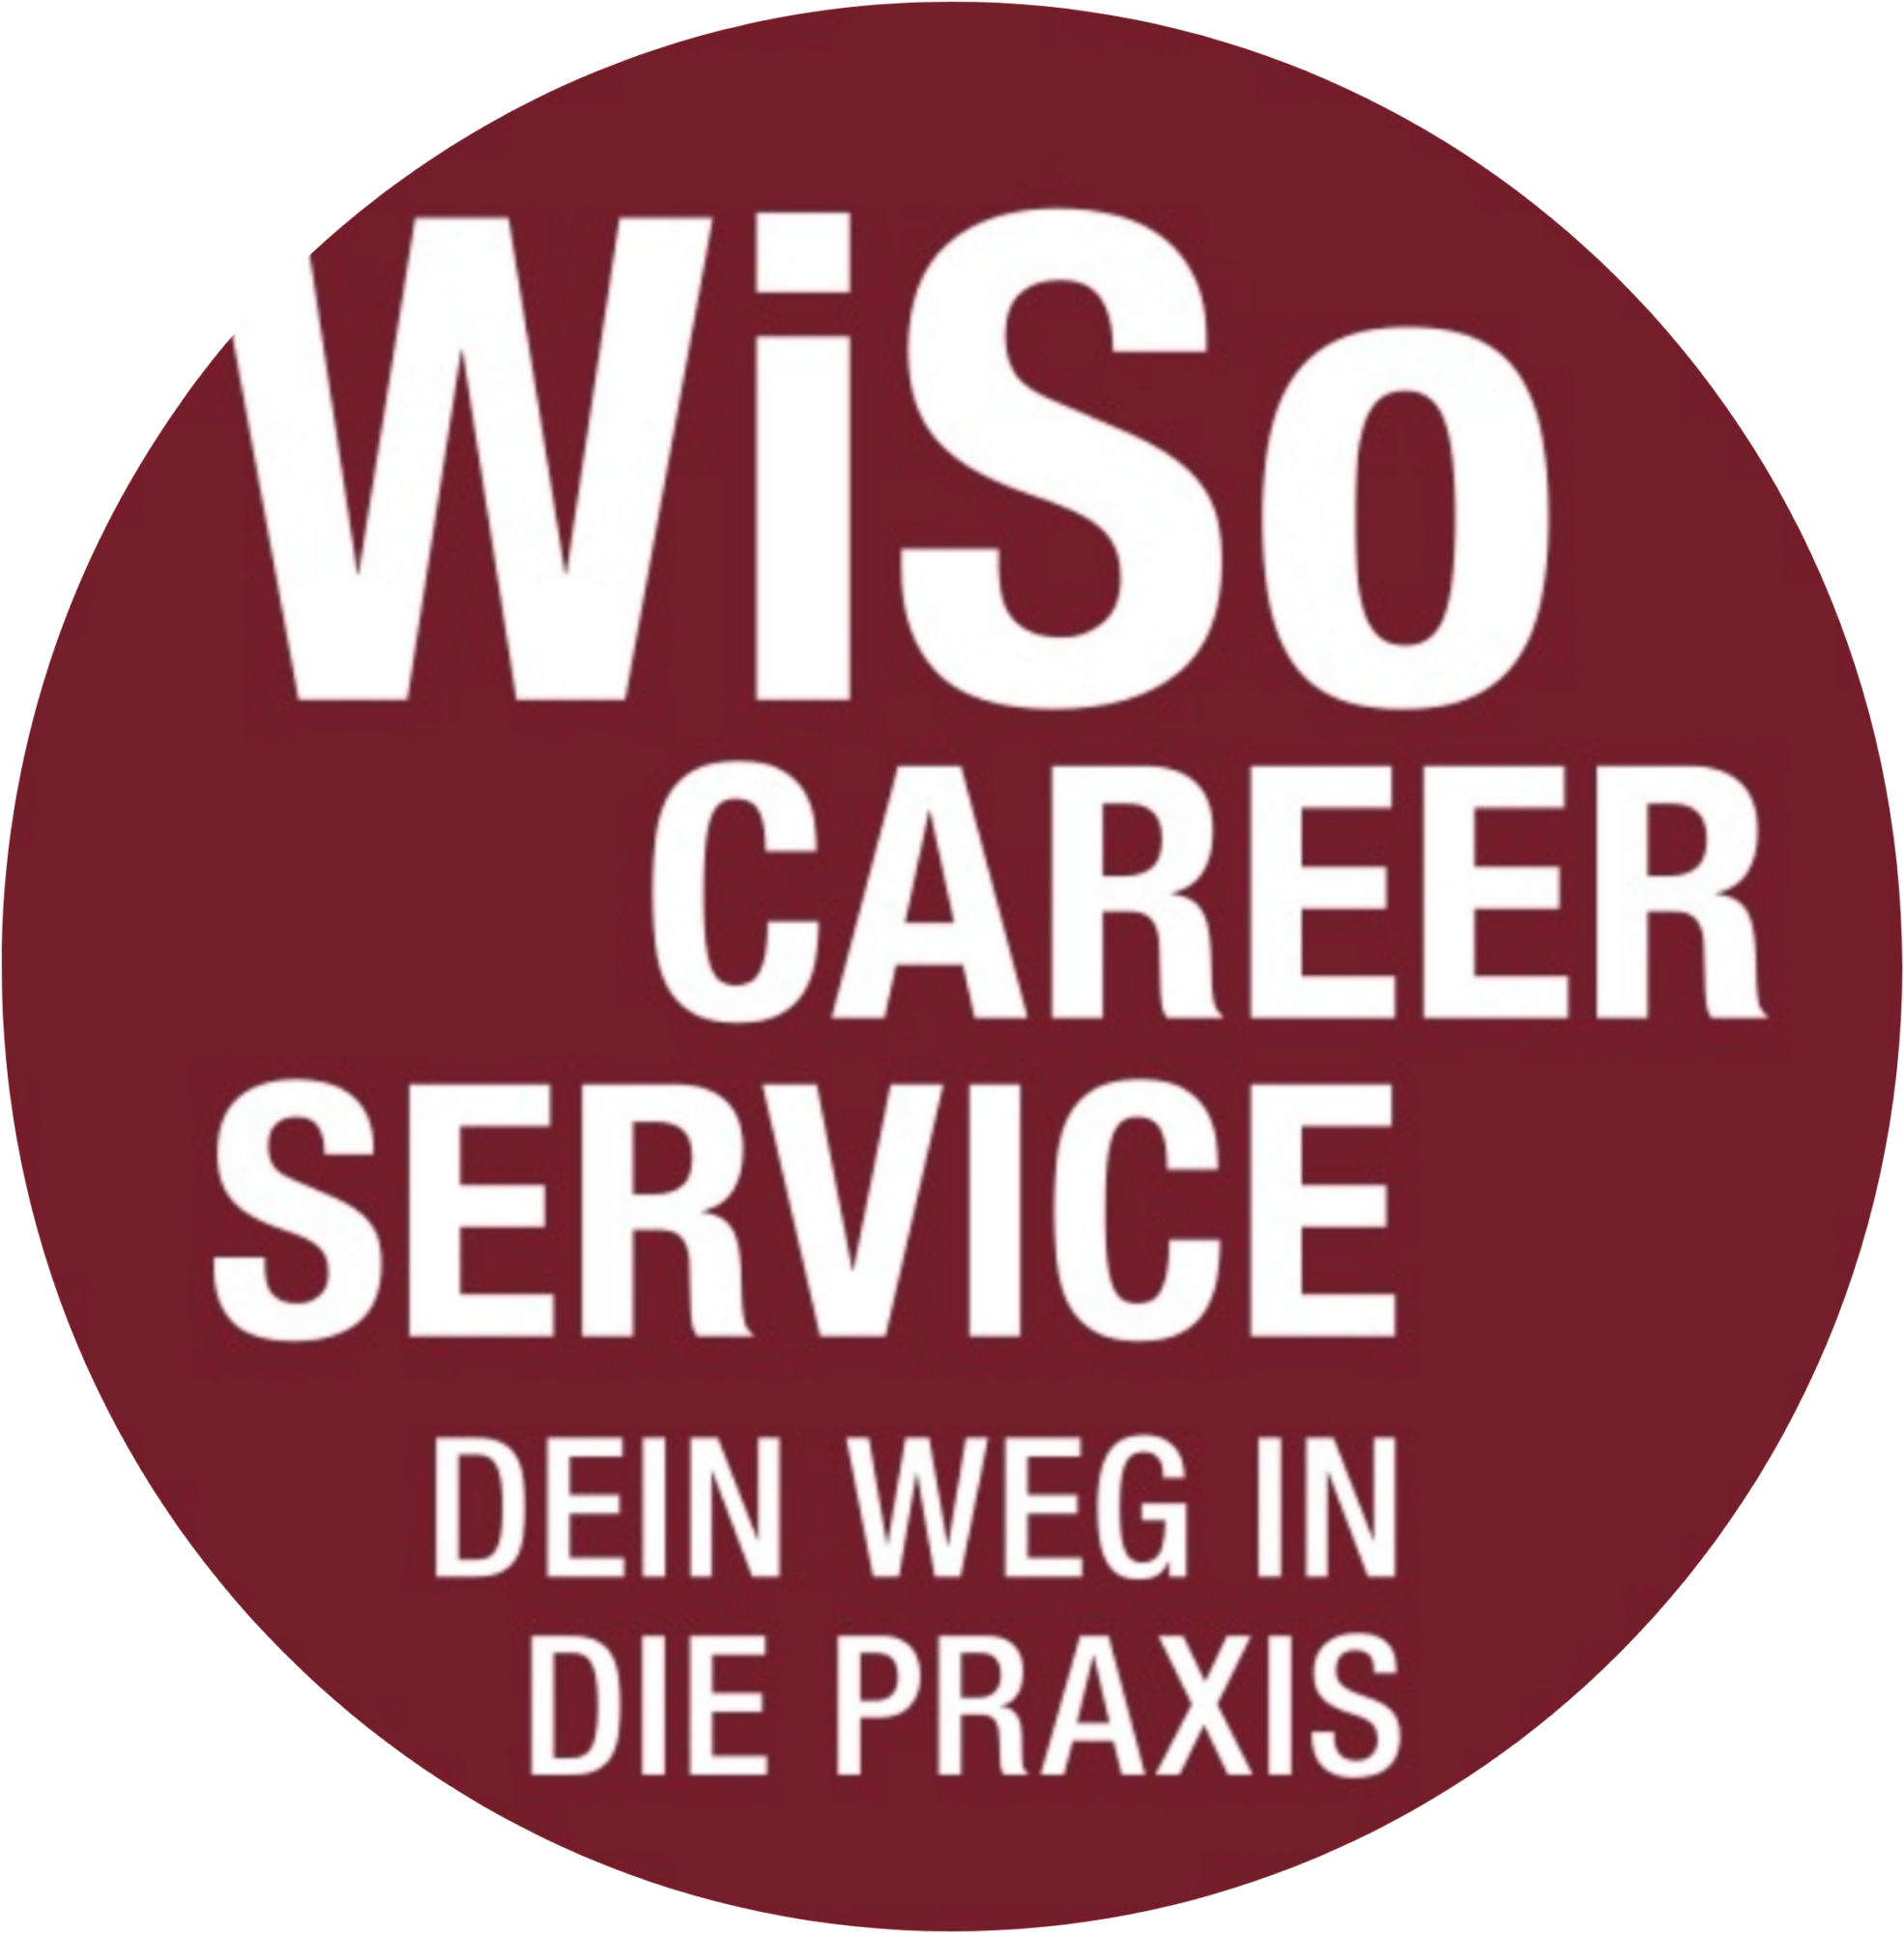 Career Service at the WiSo